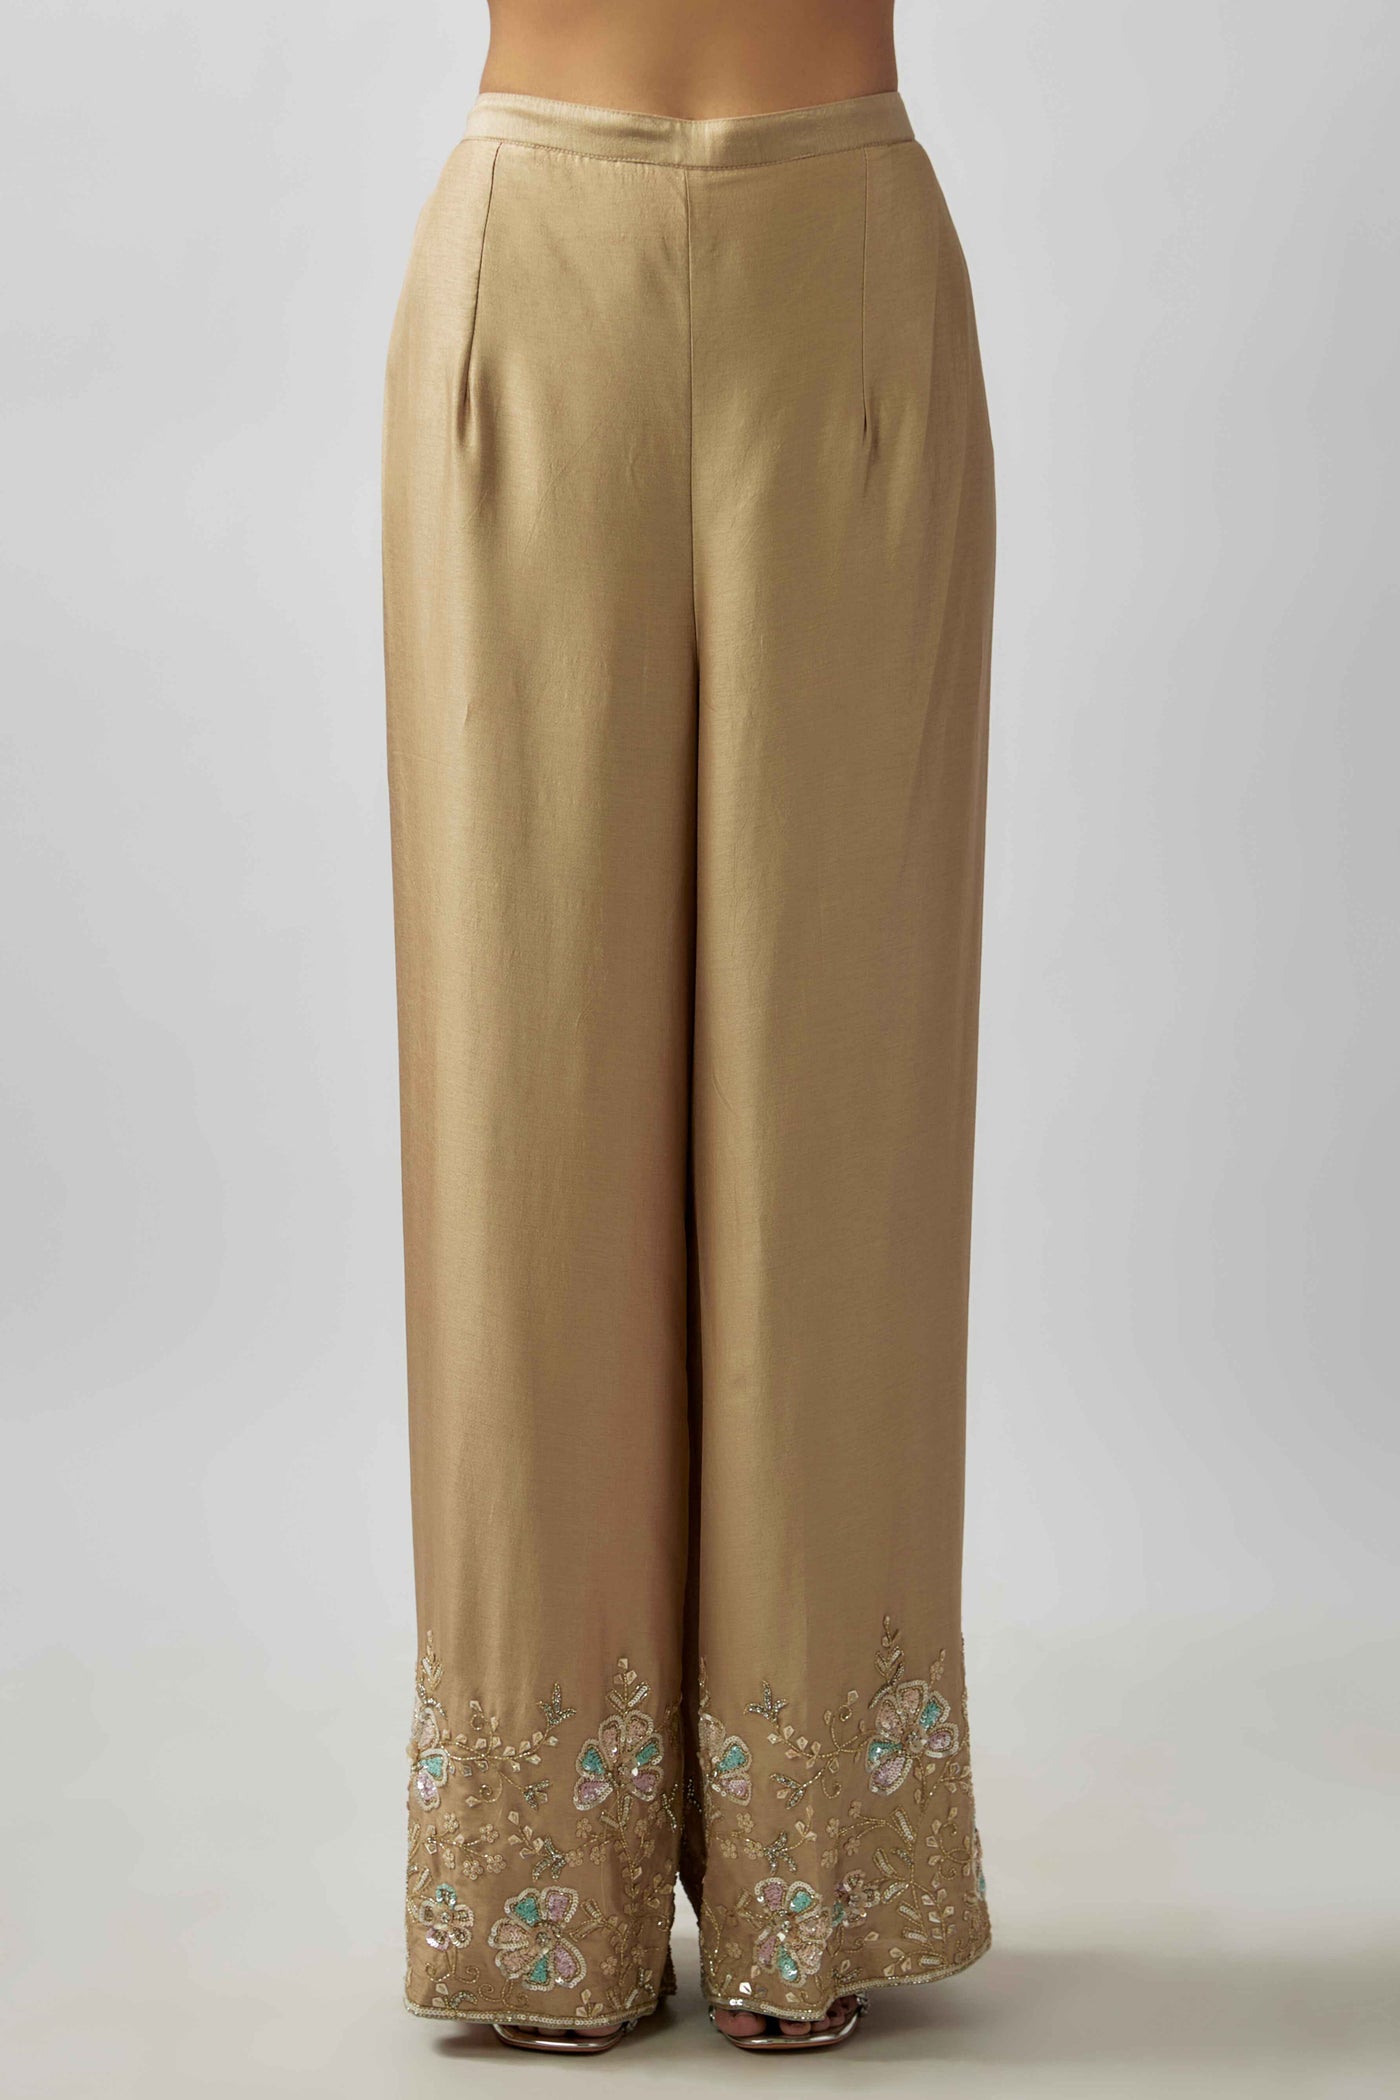 FLORA ZEAL SUIT - CHAMPAGNE GOLD